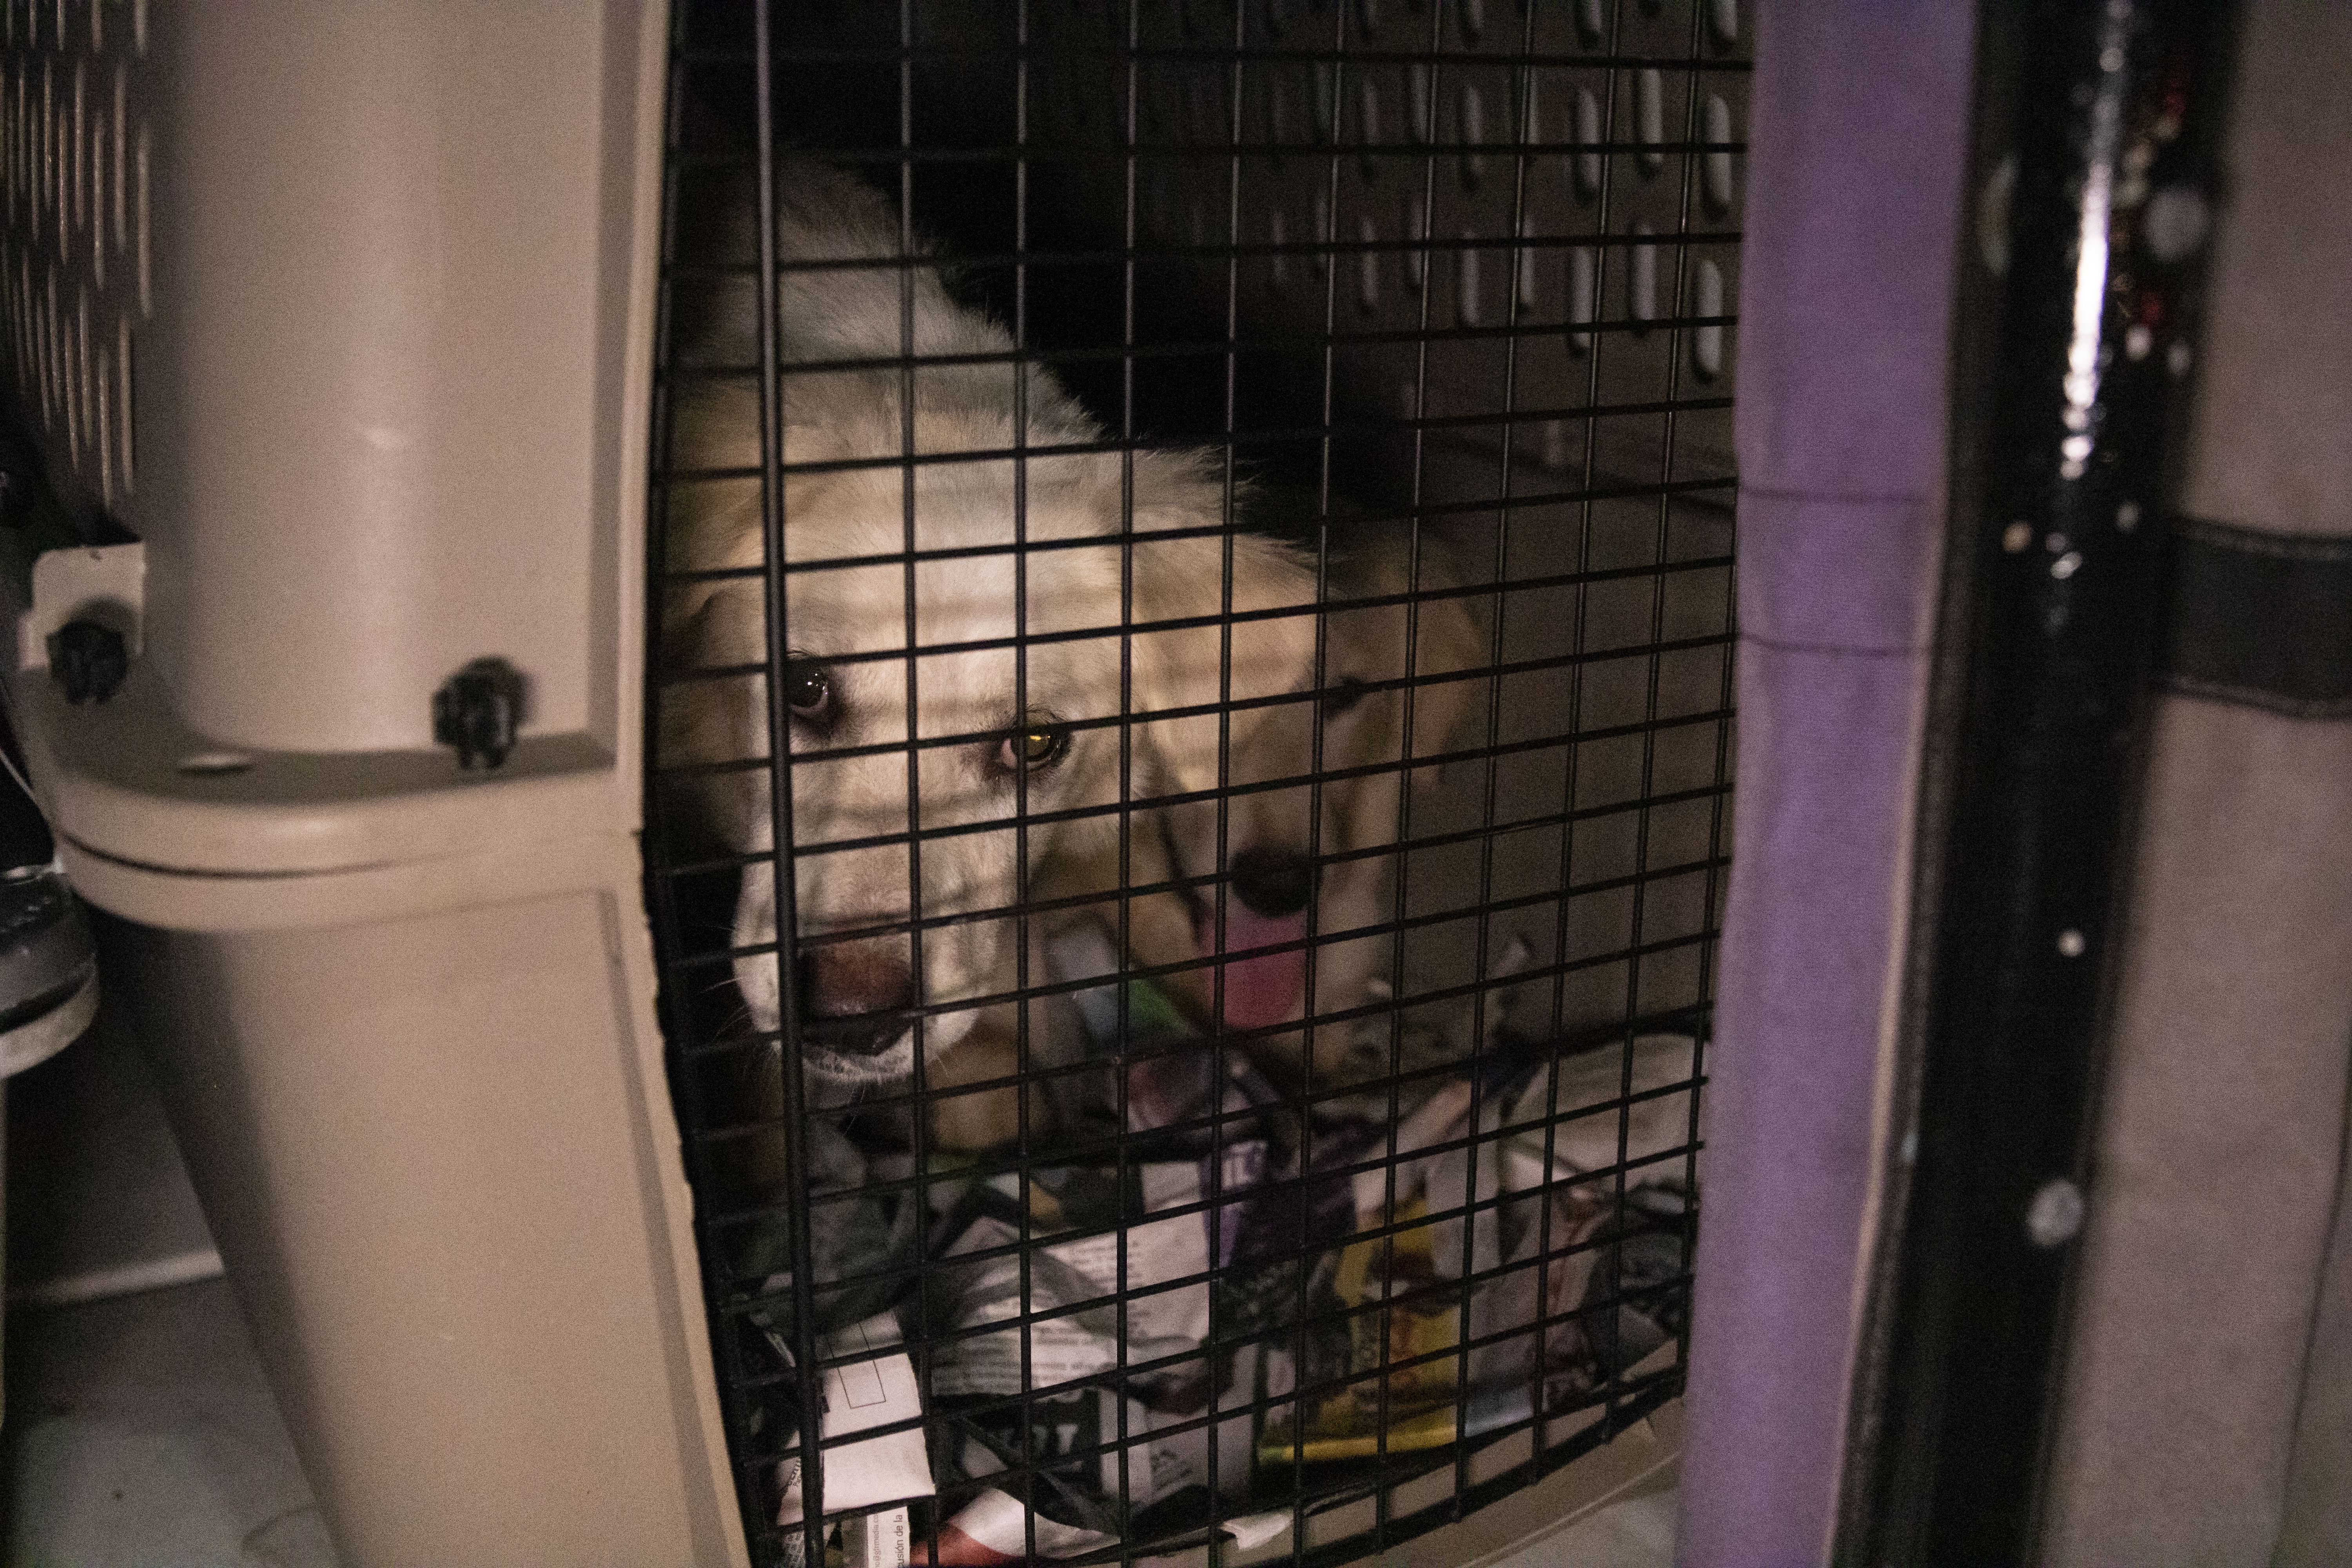 Many dogs are in pairs of two for transport because the less space in the crate the safer it is for them. This technique ensures dogs cannot slide around too much and get hurt. Image by Jamie Holt. United States, 2019.
